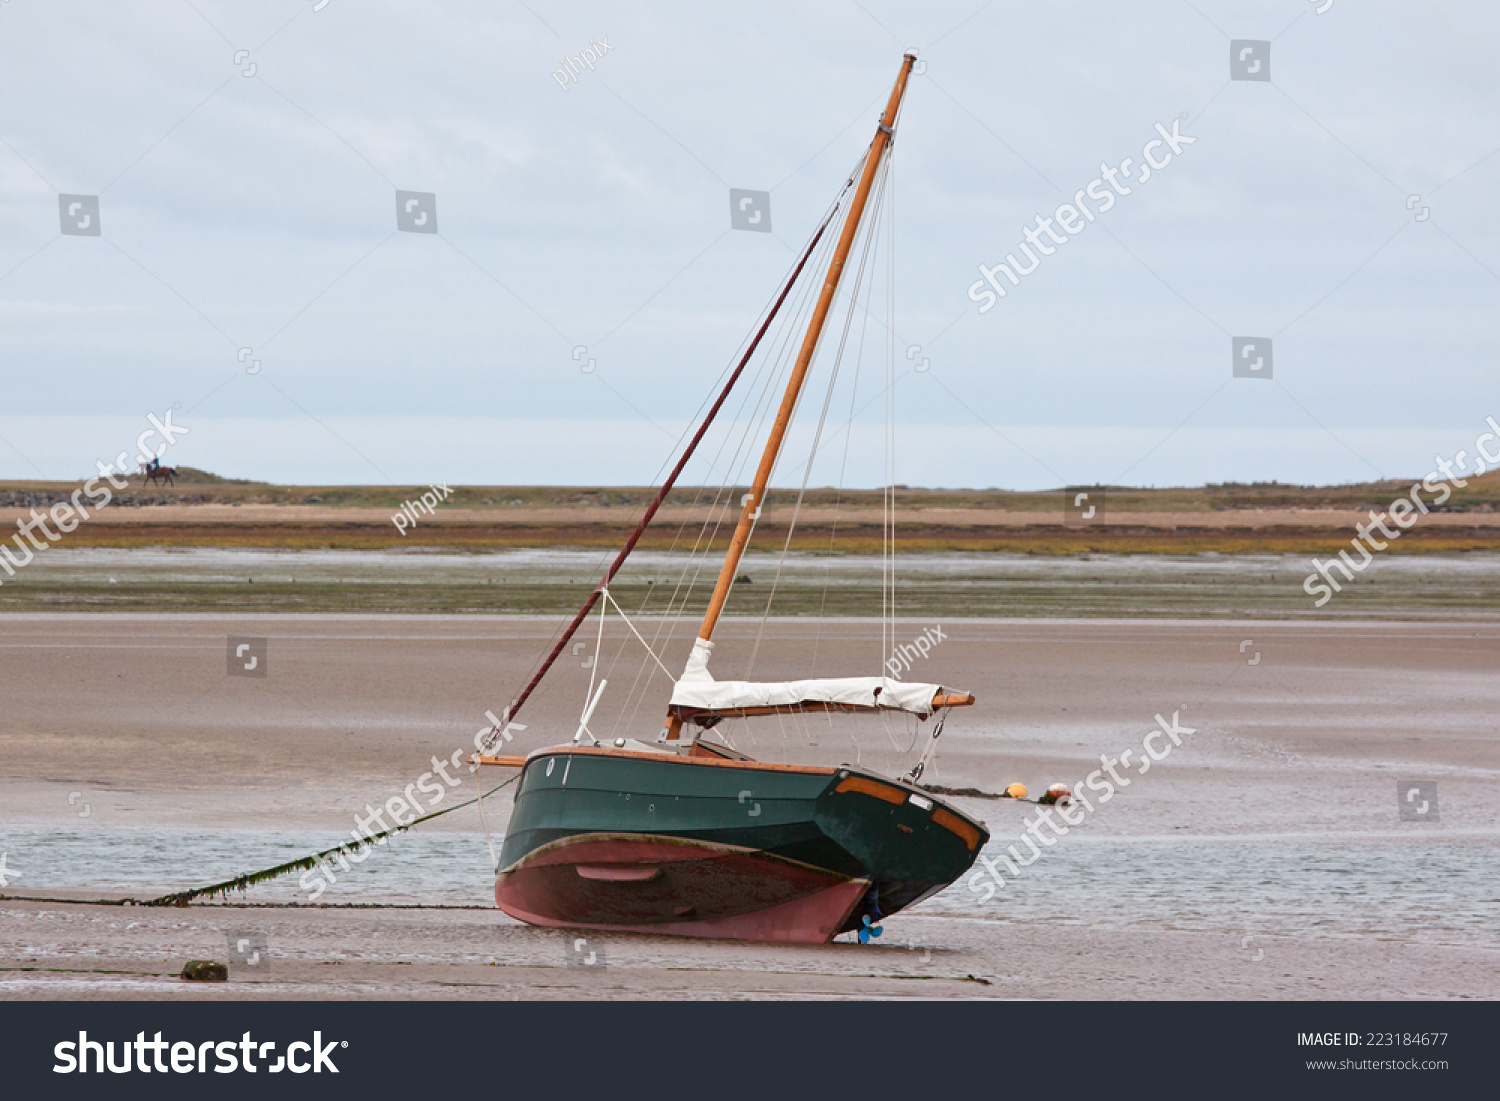 Moored Sail Boat Low Tide Sitting Stock Photo 223184677 - Shutterstock